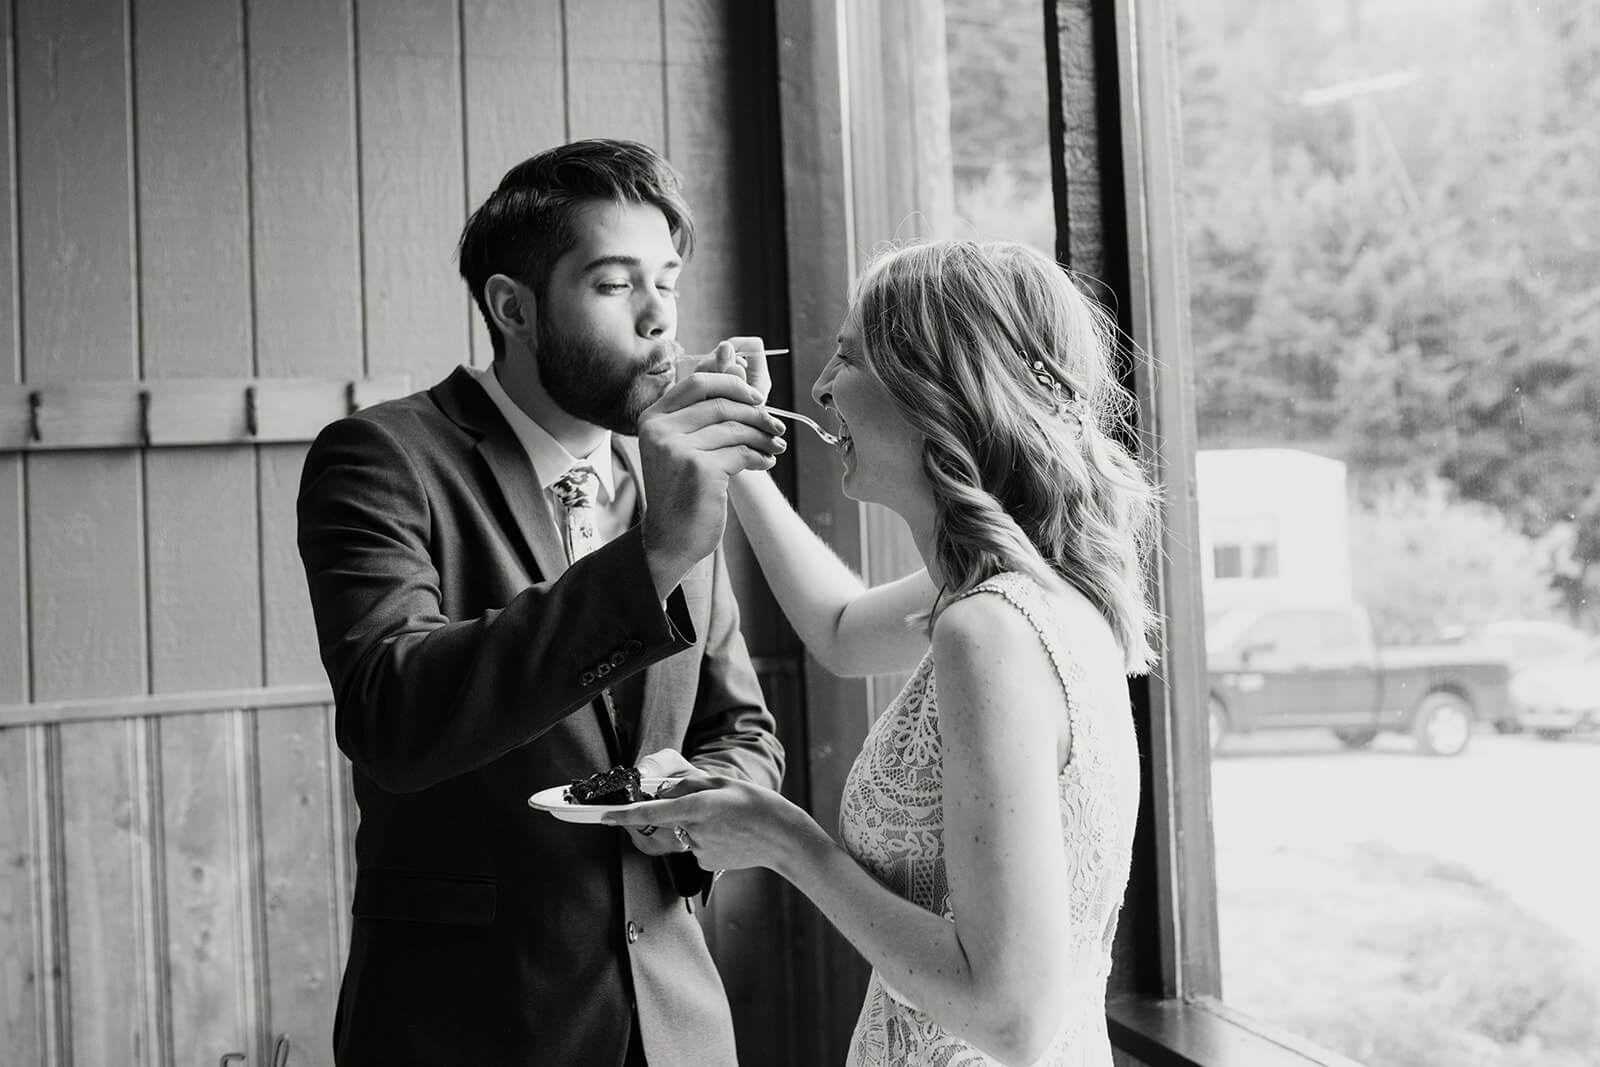 Bride and groom feed each other cake at ski wedding